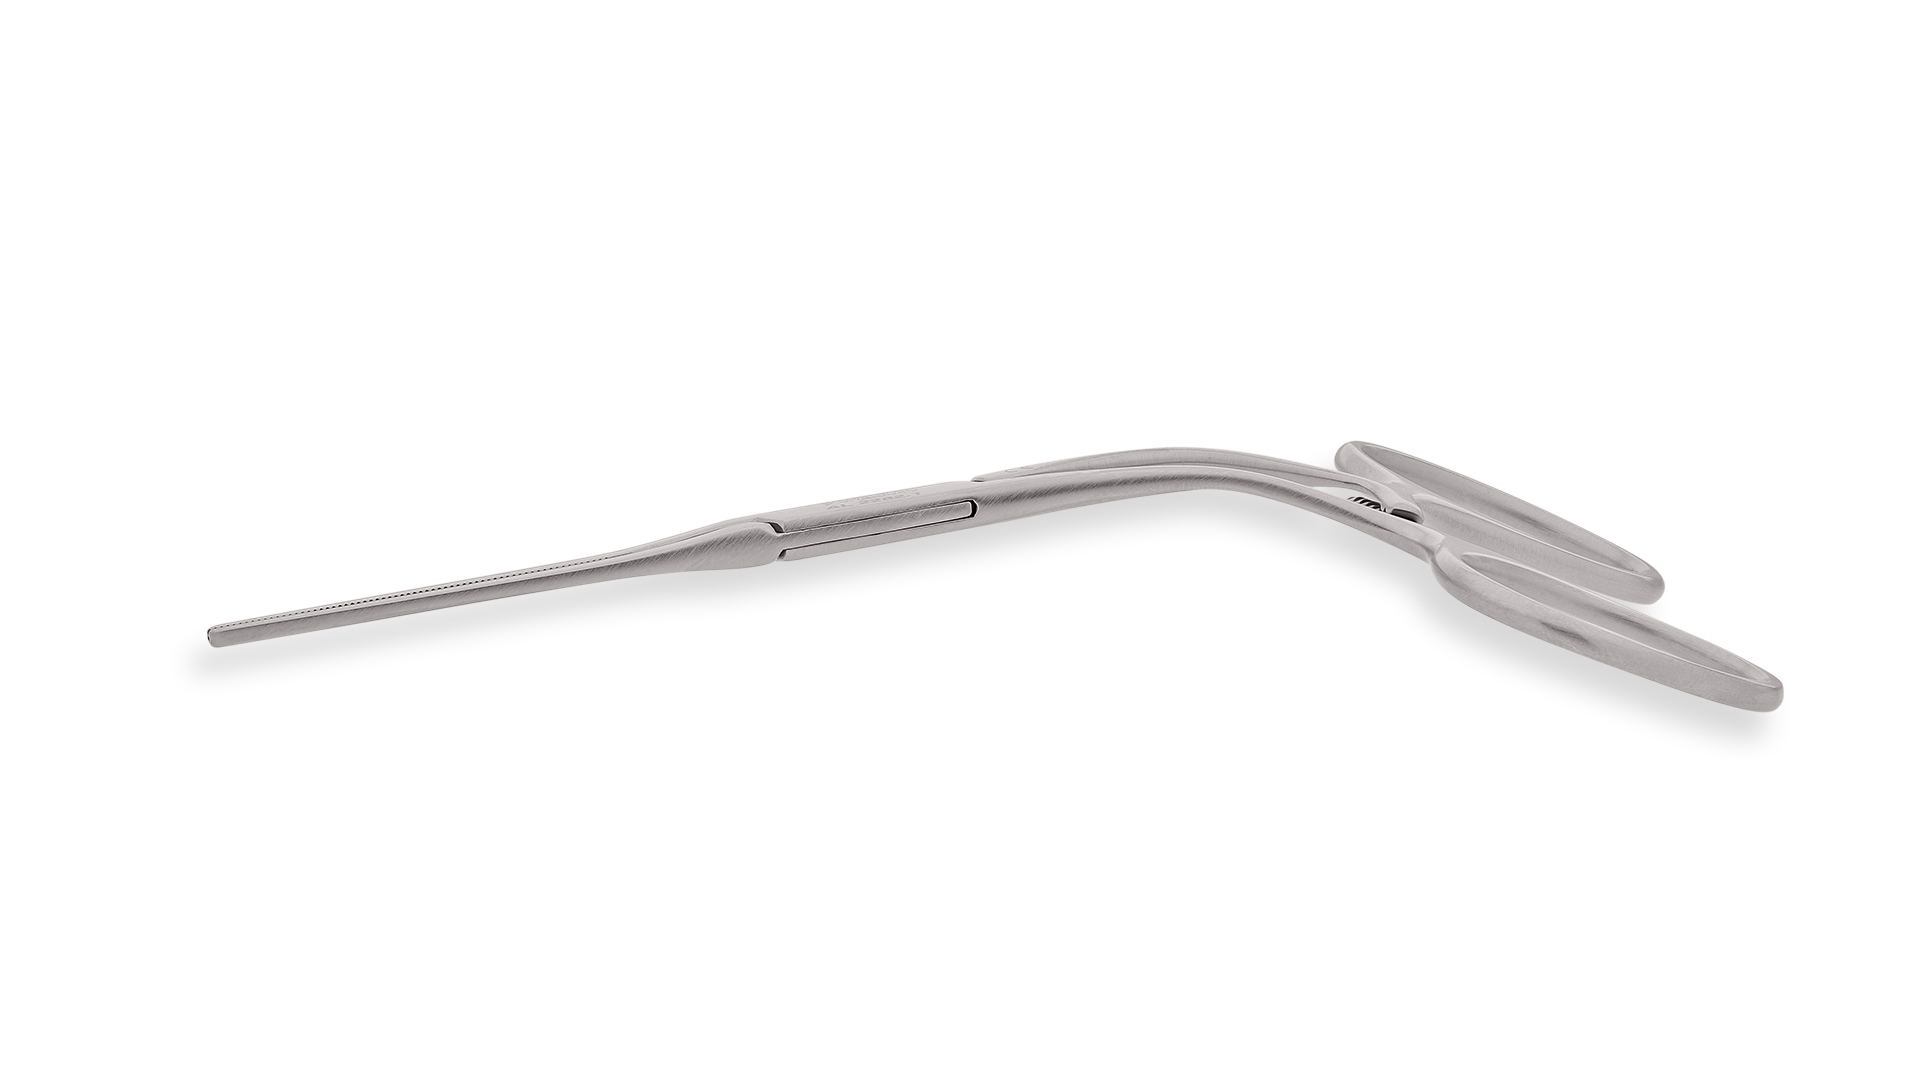 Cooley Neonatal Clamp - Straight Cooley Atraumatic jaws